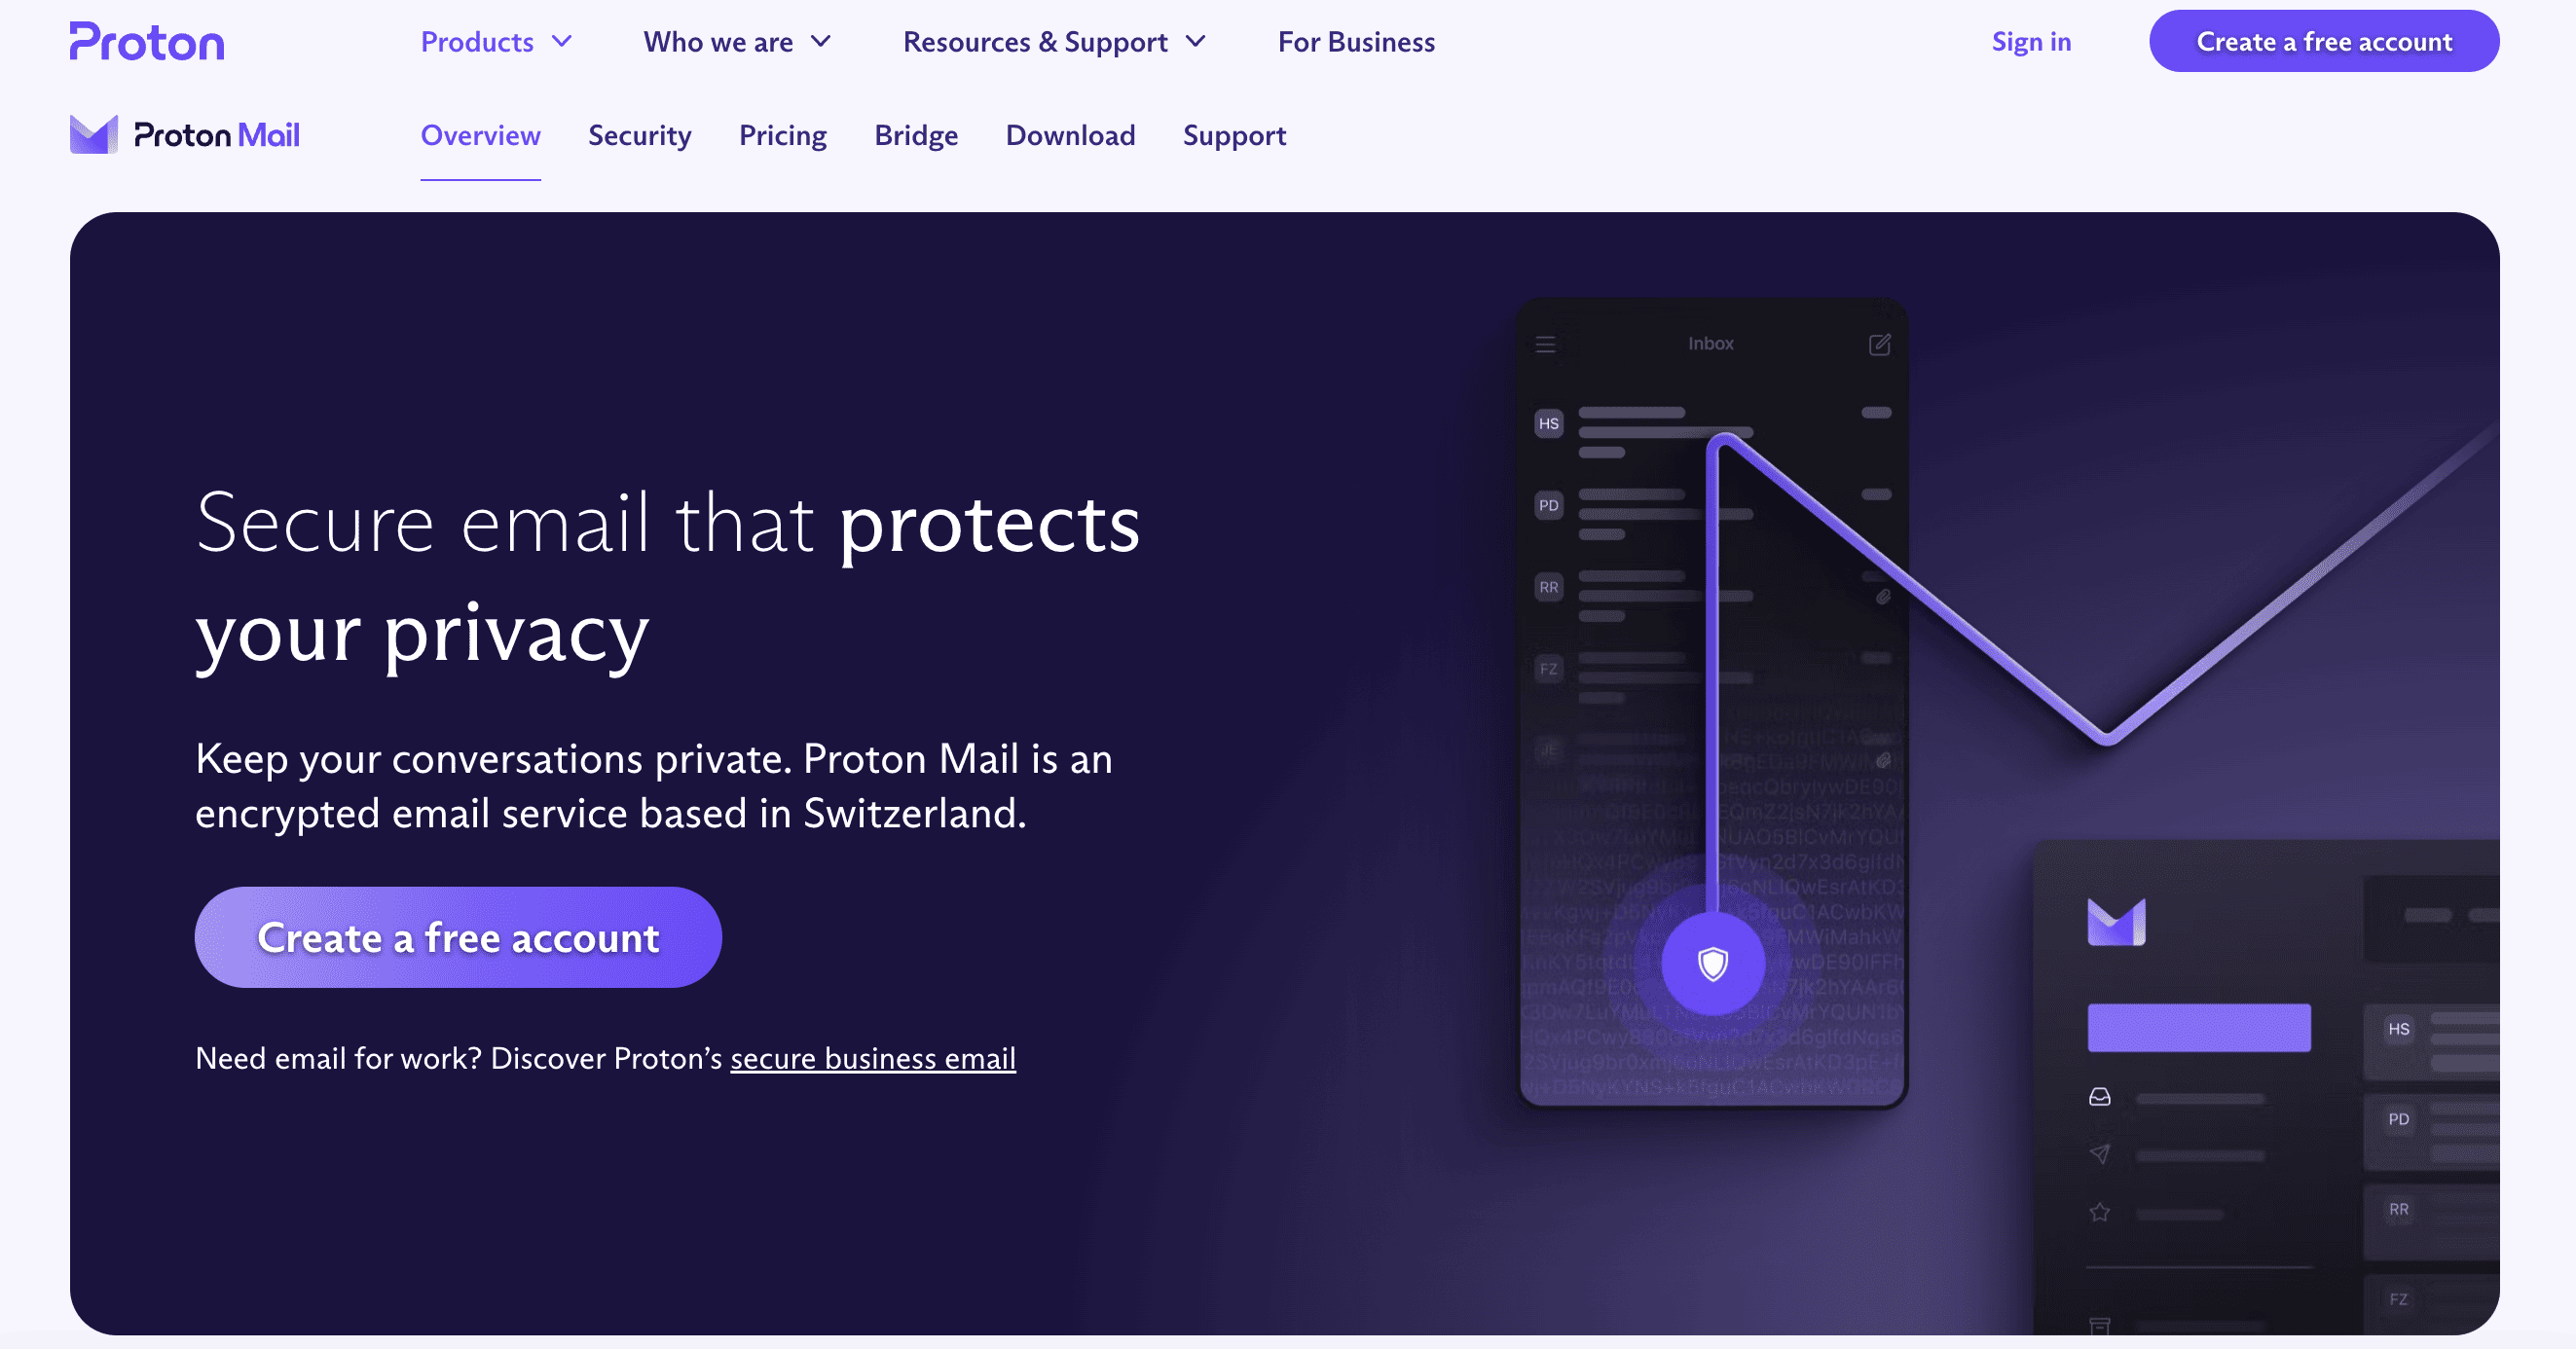 Go to the official website of Proton Mail